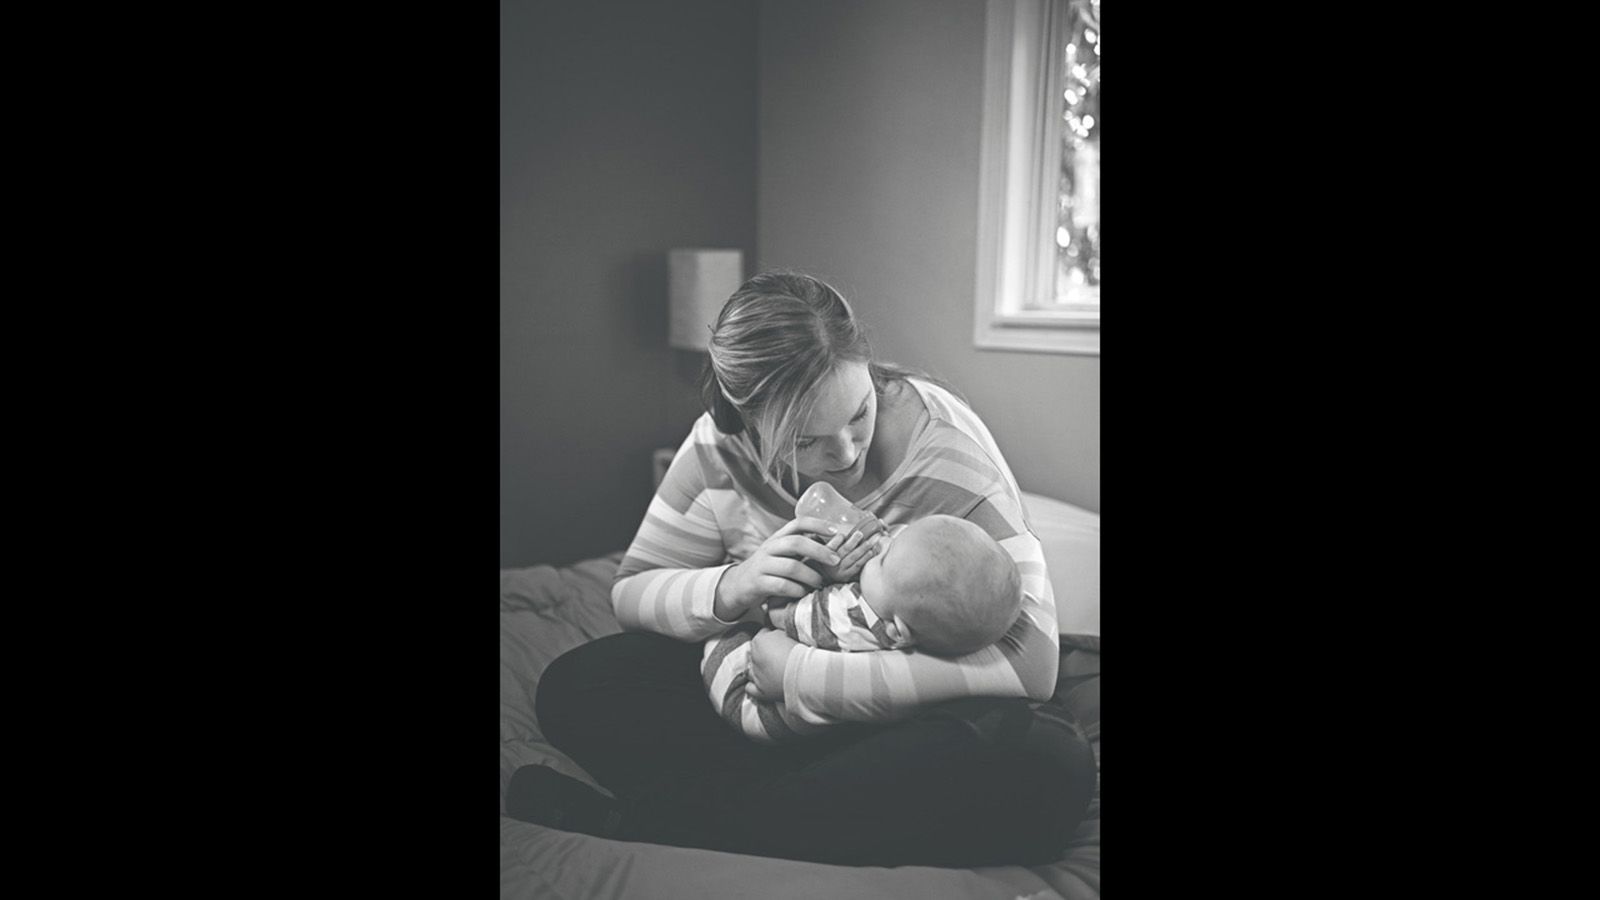 Is It Okay If I Don't Breastfeed? – Forbes Health